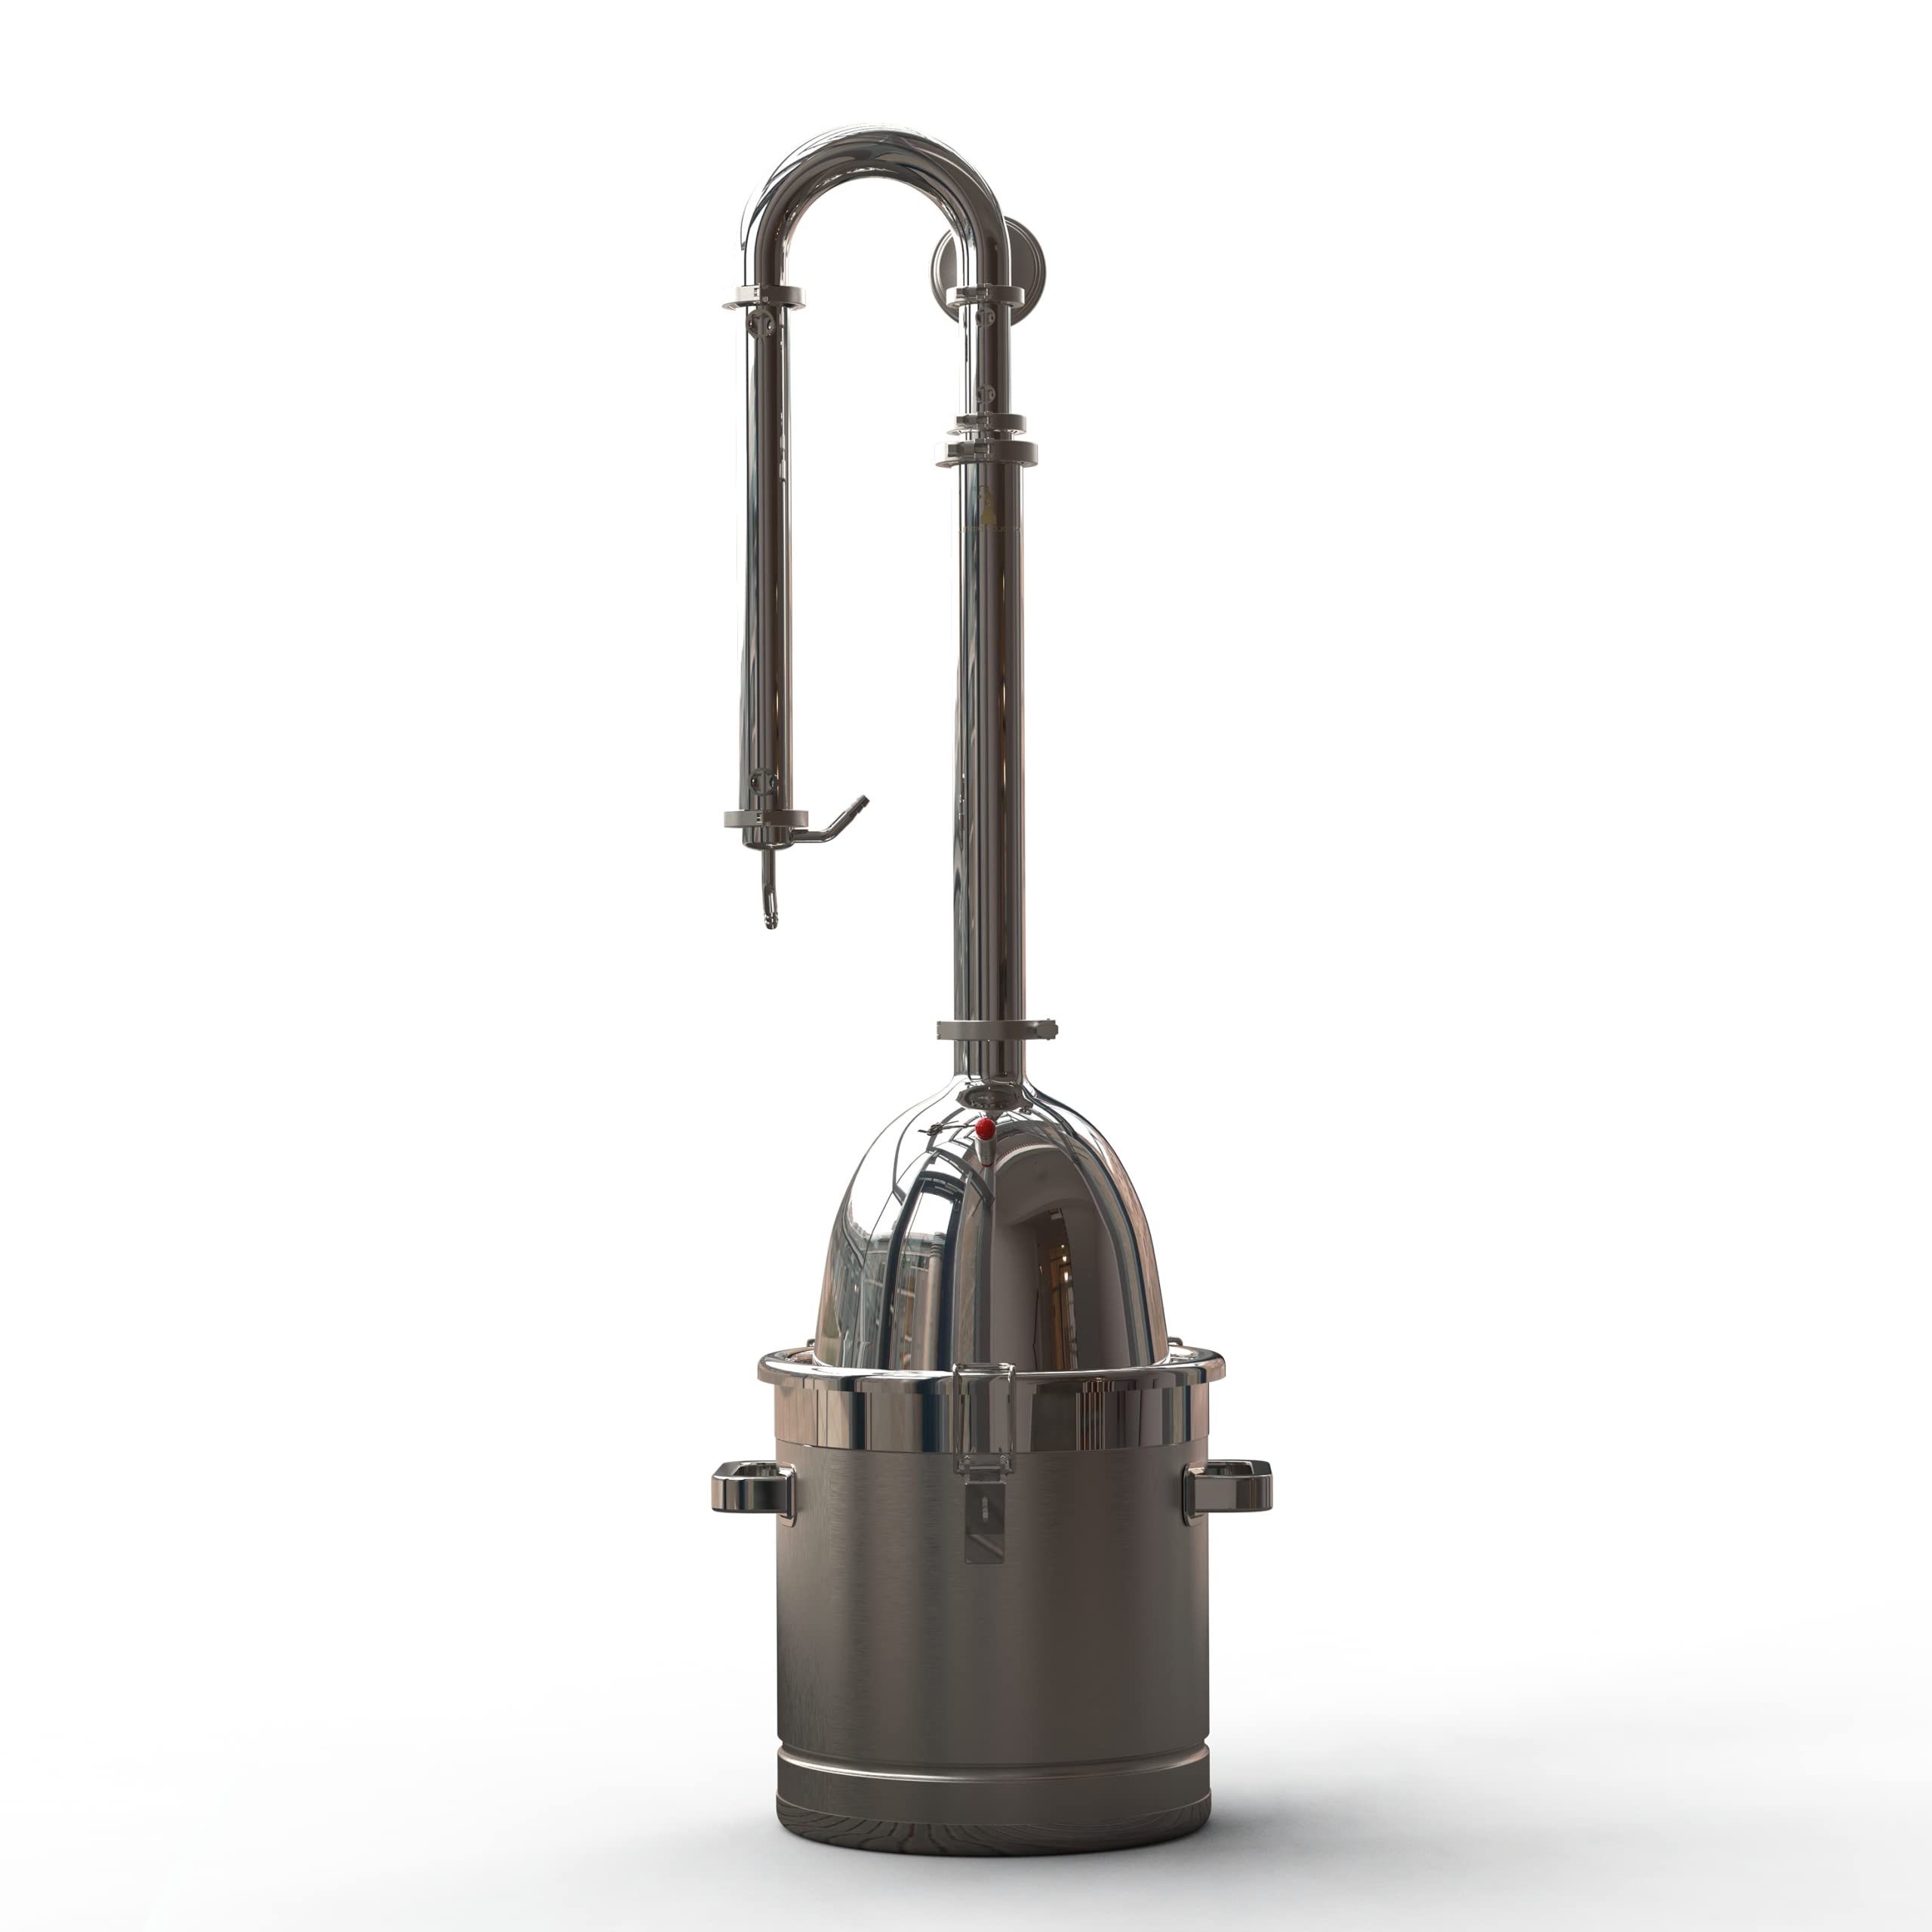 HOOLOO Alcohol Distiller Still for Home Use Kit 304 Stainless Steel Whiskey Making Kit with Thermometer Whiskey Brandy Vodka 4.6Gal (17.6L) (SV-22) (4.6Gallon/17Liters-Rocket Lid-Direct fire heating)